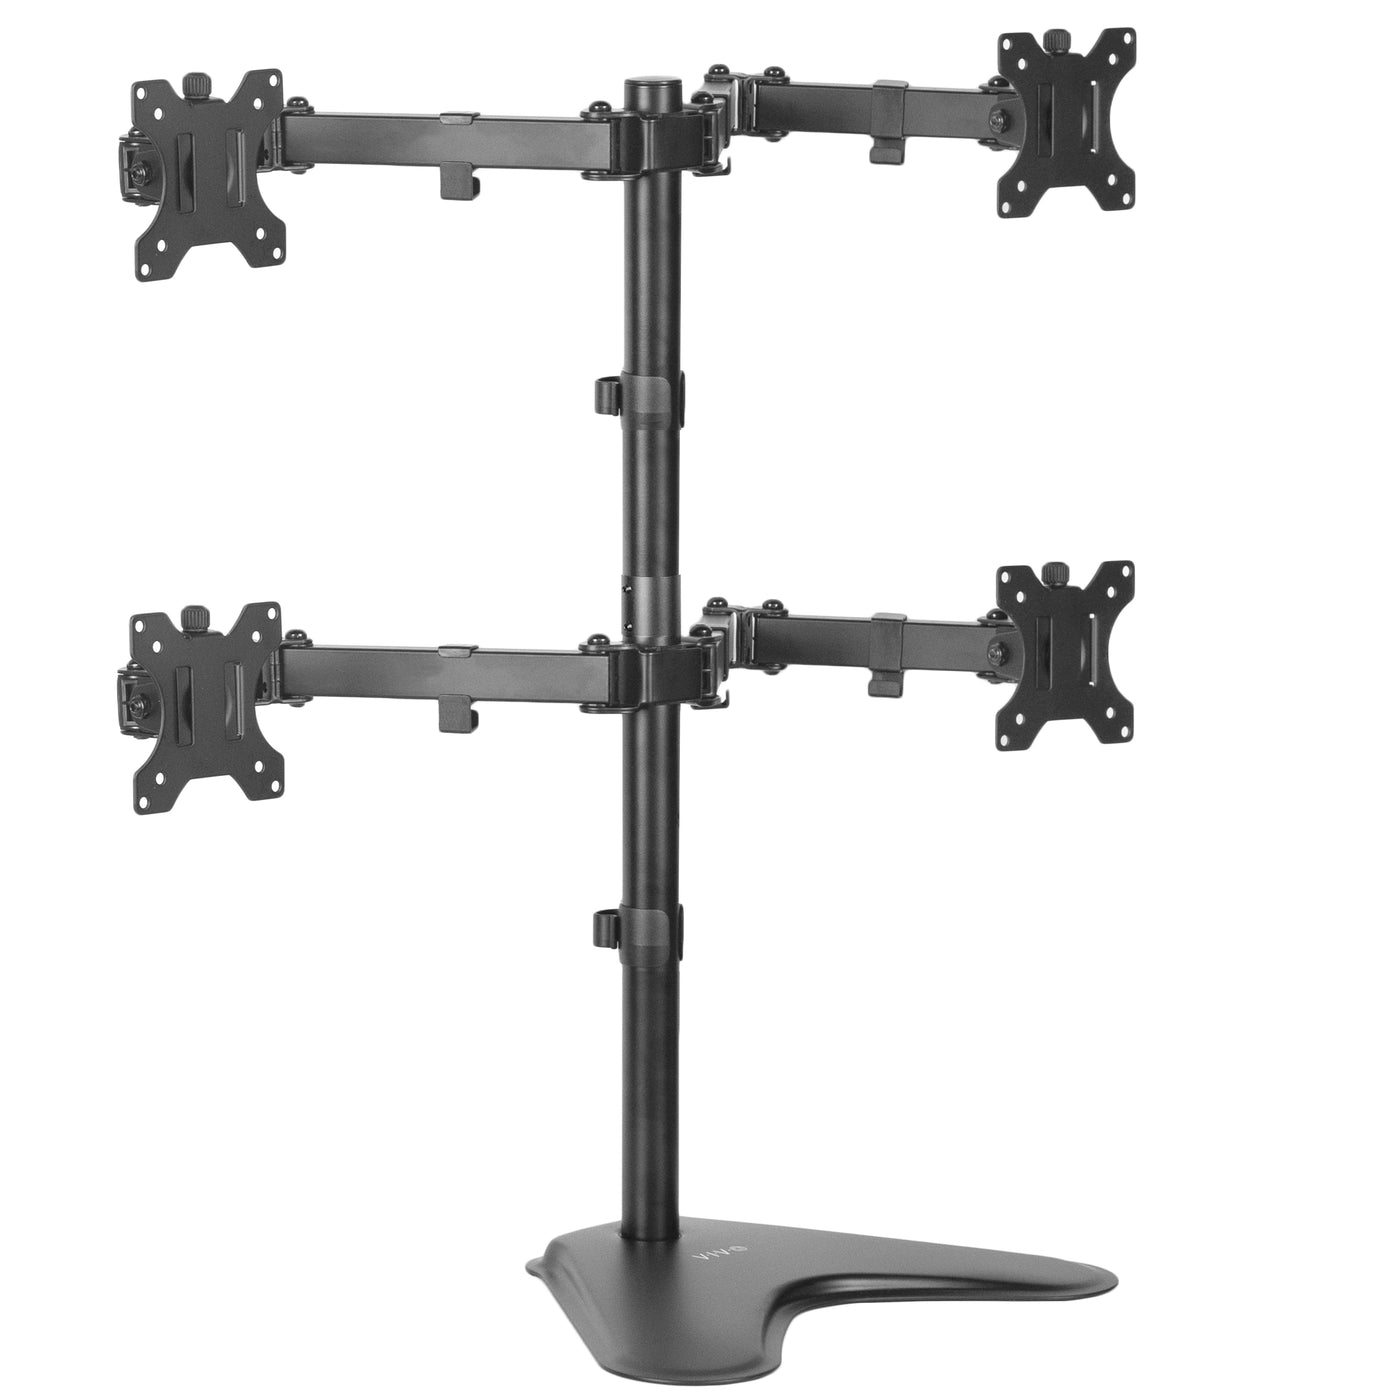 Quad Monitor Desk Stand holds 4 screens for work efficiency at your office desk. Features a freestanding base.